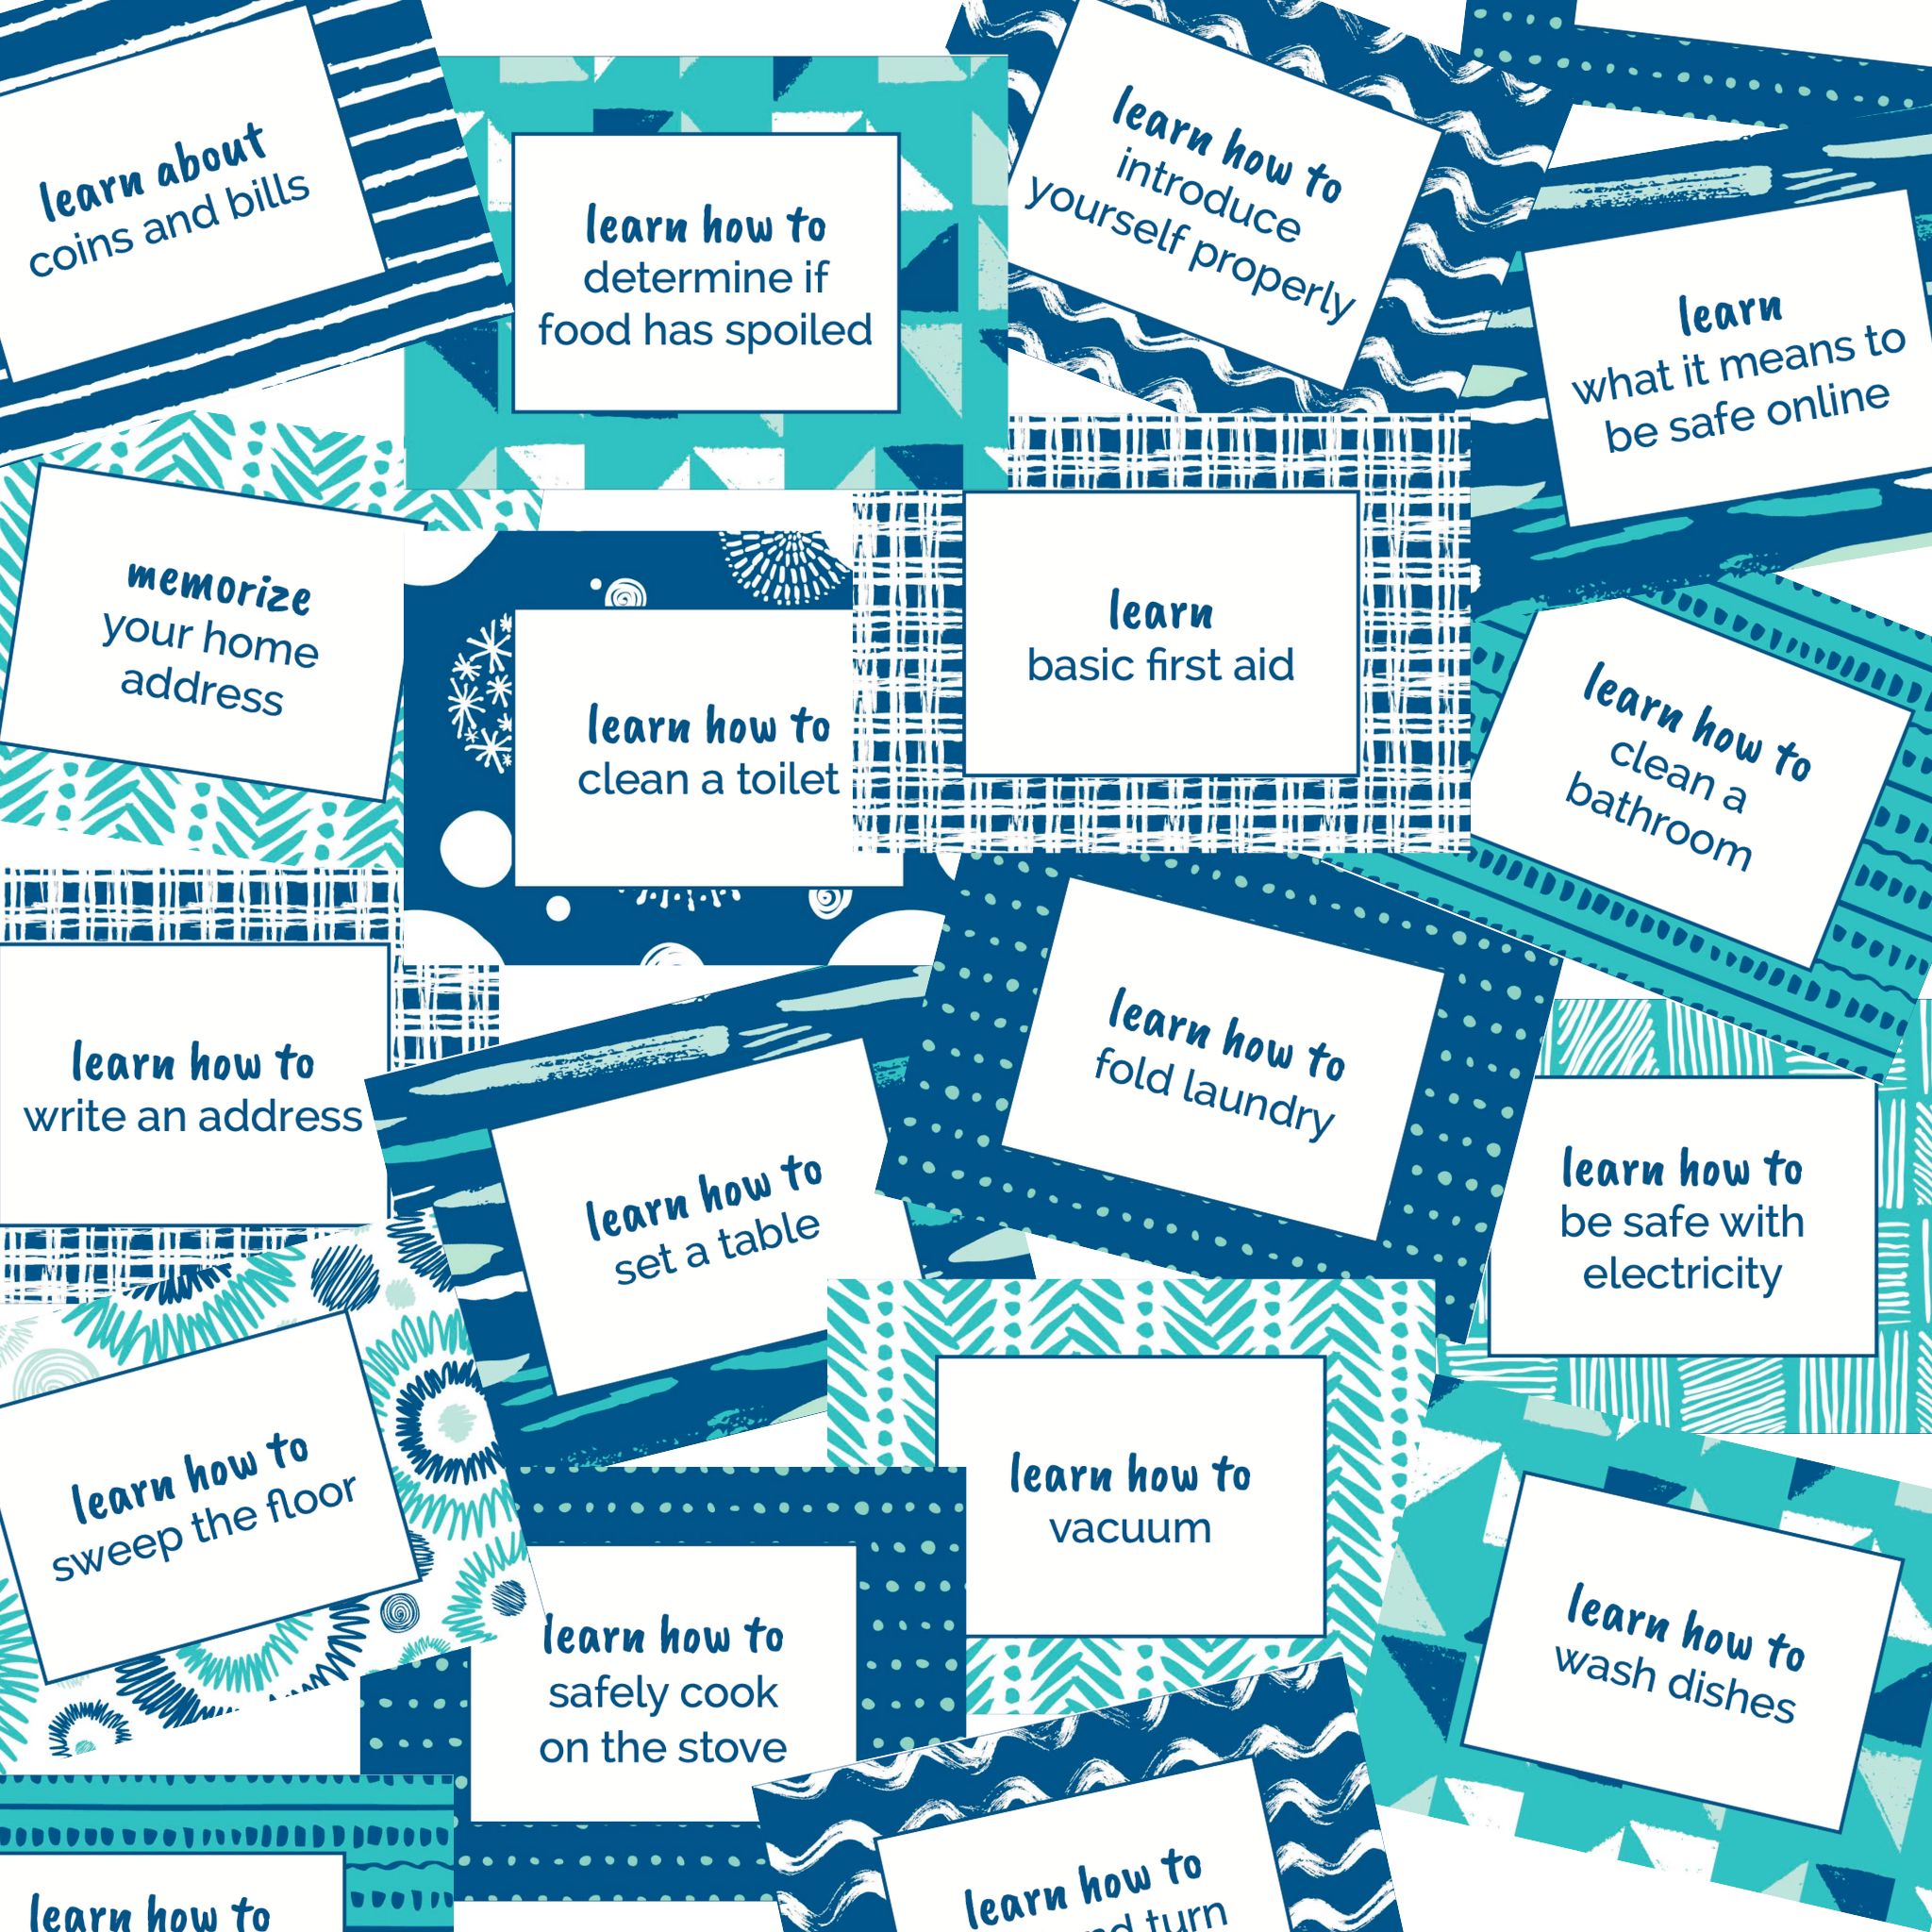 81 Life Skills Cards for Kids